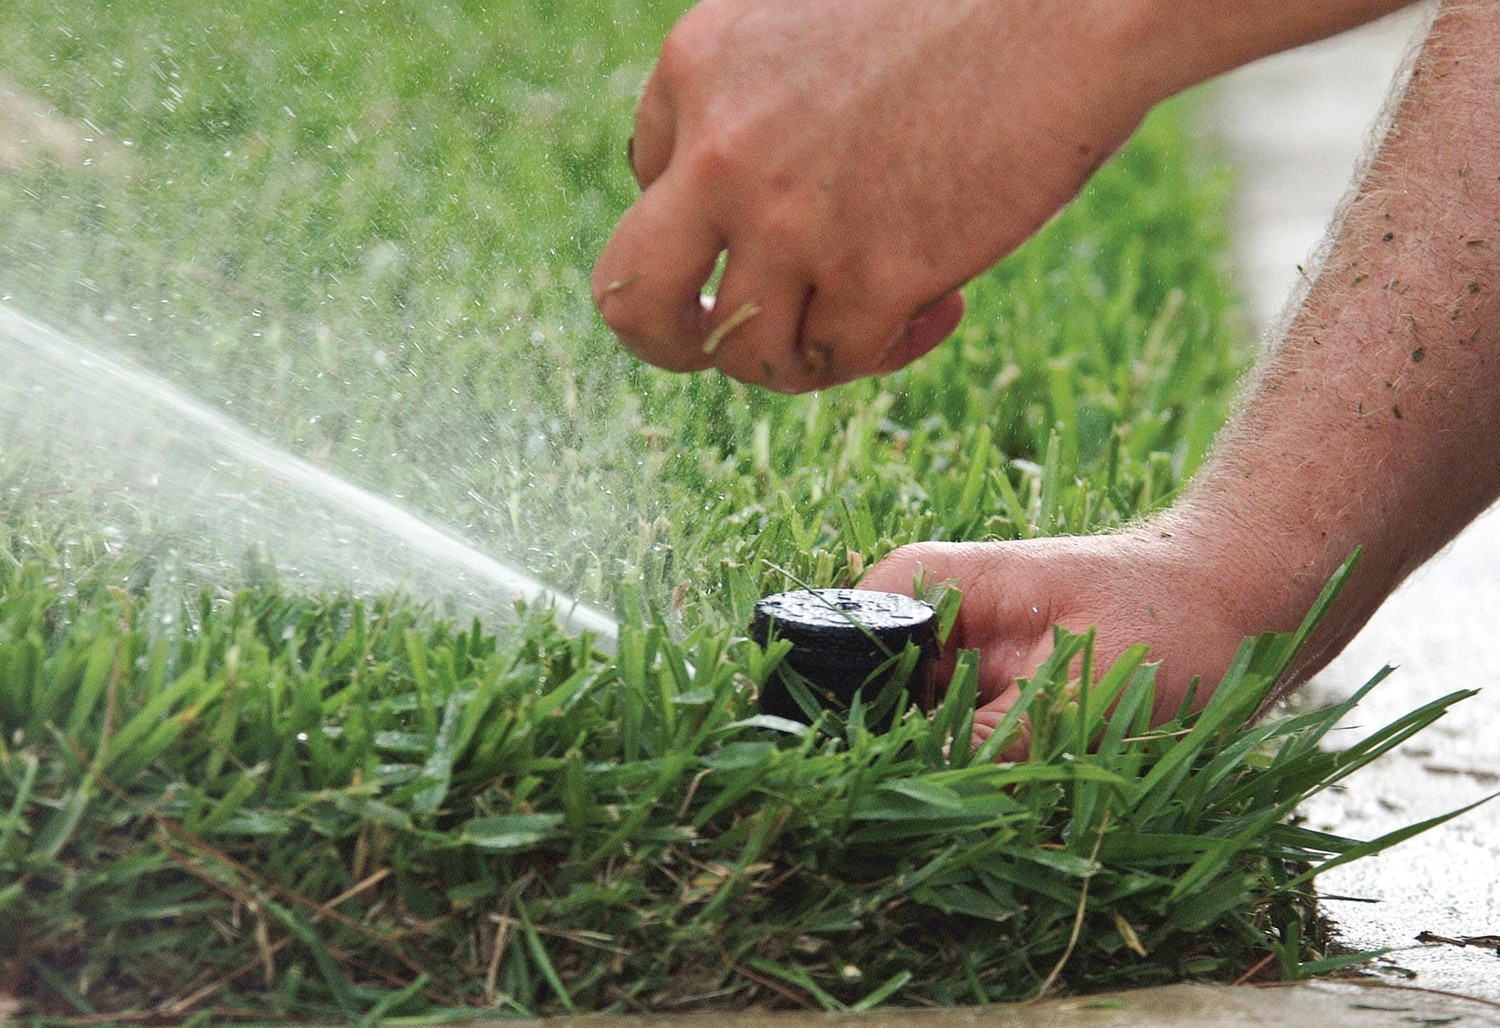 Professional Irrigation Services Keep Delray Beach Lawns and Gardens Thriving